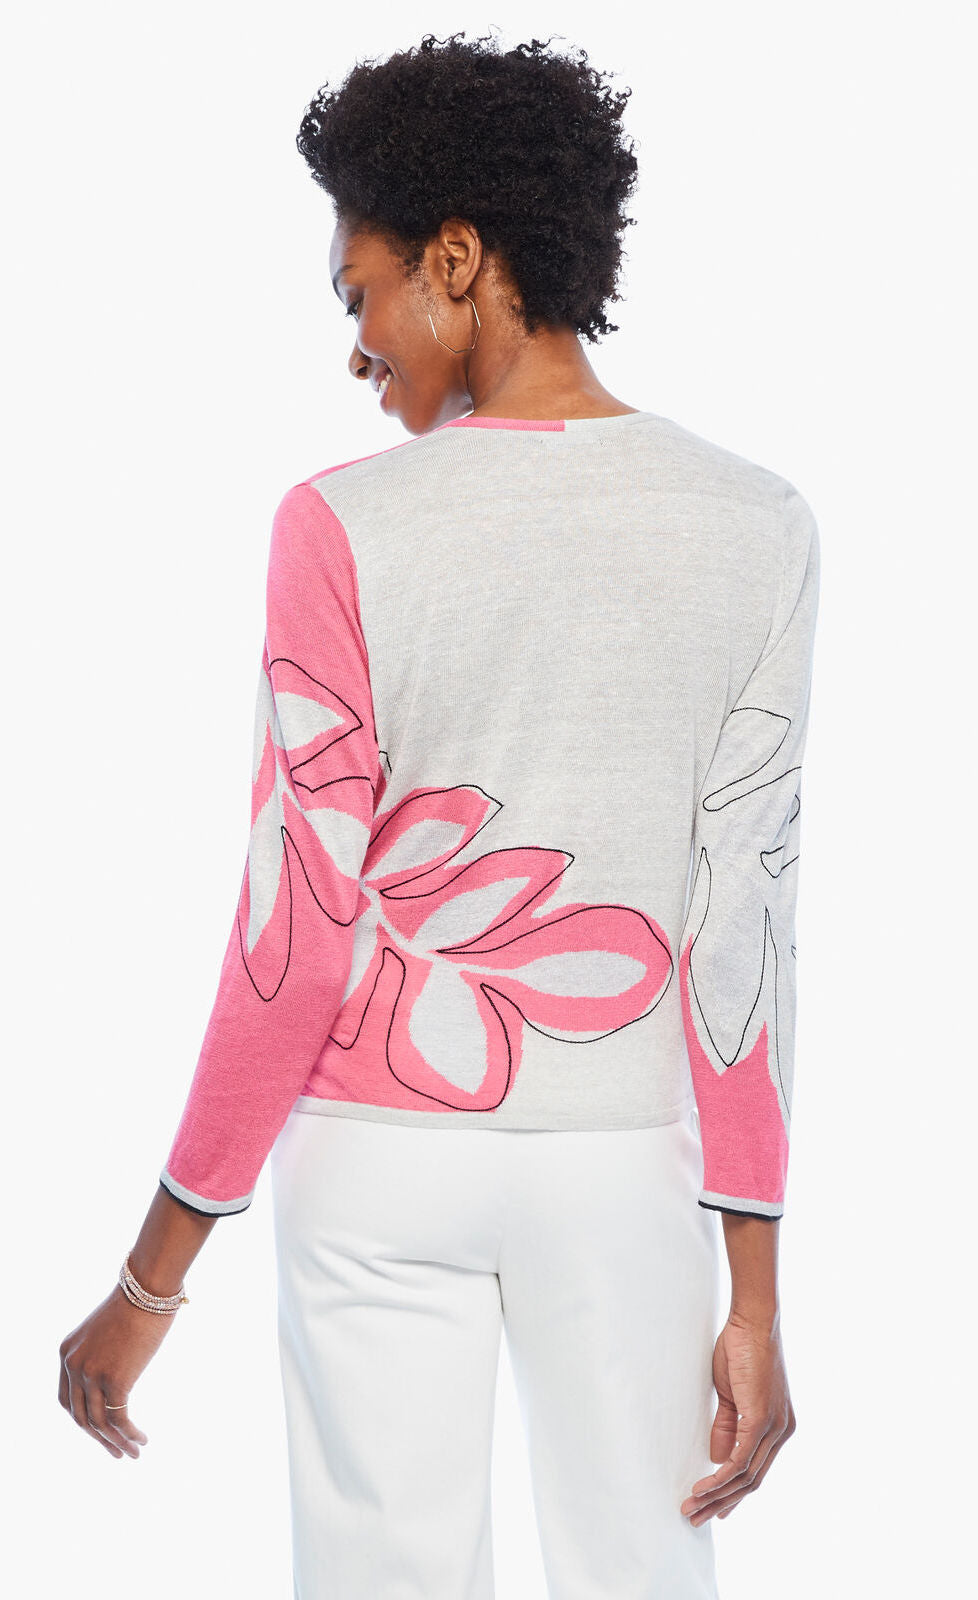 Back top half view of a woman wearing the nic+zoe hibiscus tie sweater. This sweater has a wrap look with a faux side tie. The back is white with a pink hibiscus flower while the sleeves are pink and white. The sweater has 3/4 length sleeves.